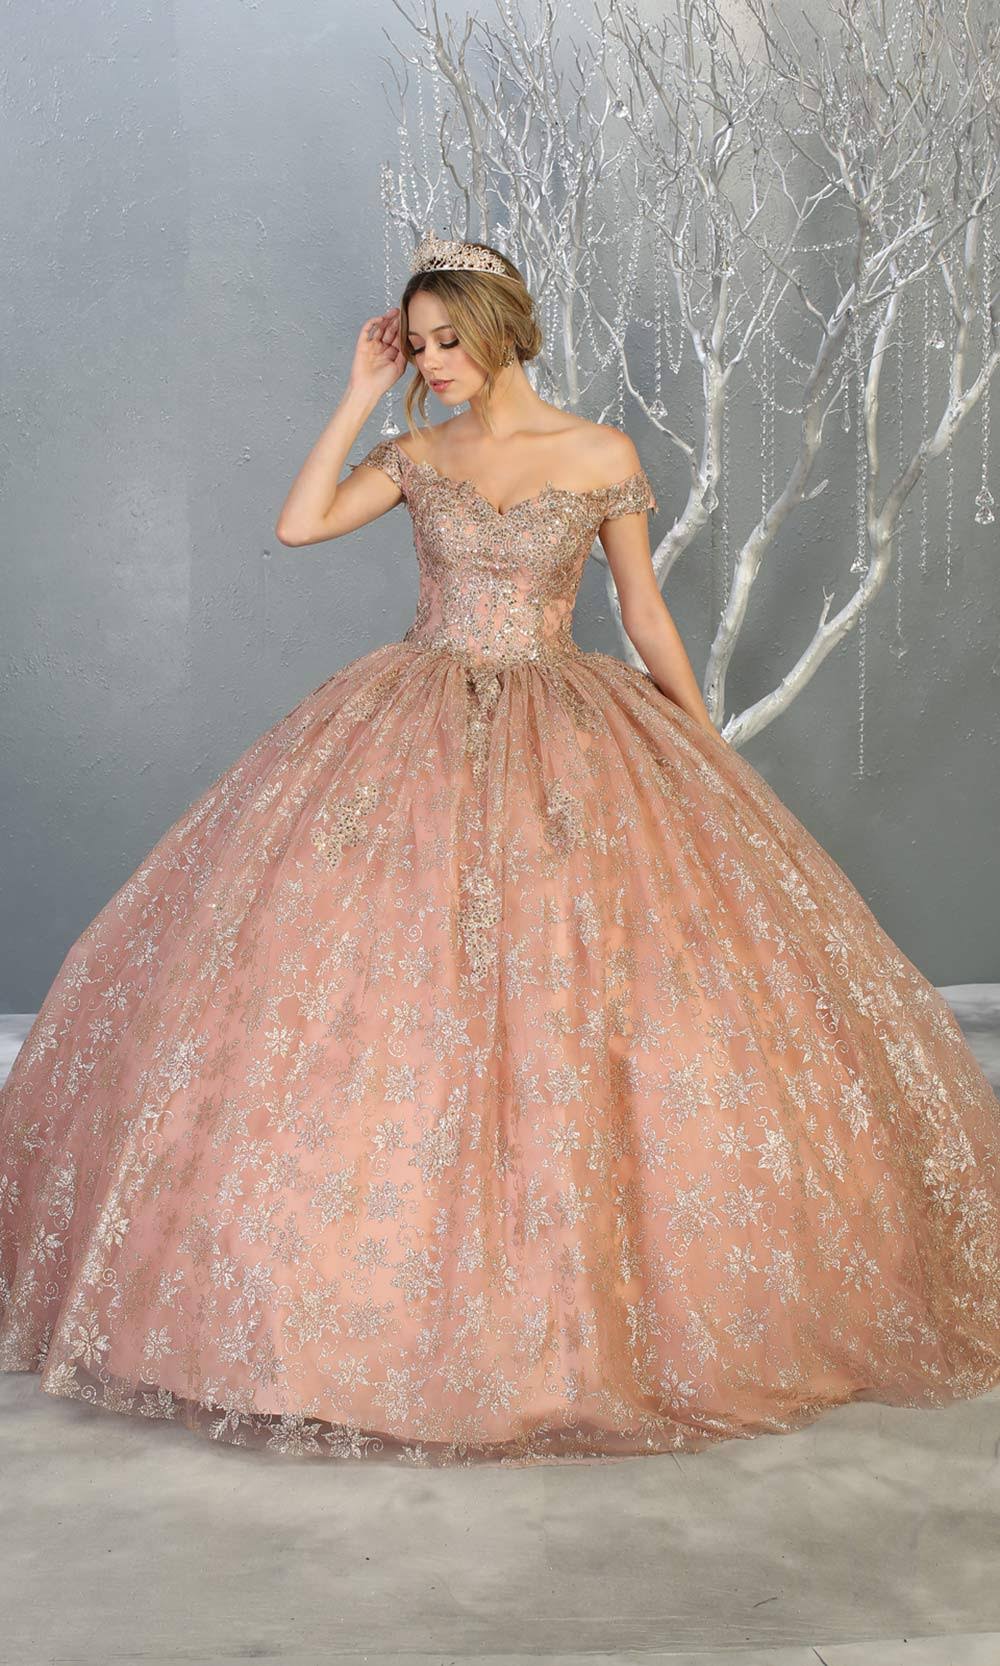 Mayqueen LK152 rose gold quinceanera off shoulder sequin ballgown. This rose gold shiny ball gown is perfect for engagement dress, wedding reception, indowestern party gown, sweet 16, debut, sweet 15, sweet 18. Plus sizes available for gold ballgowns.jpg